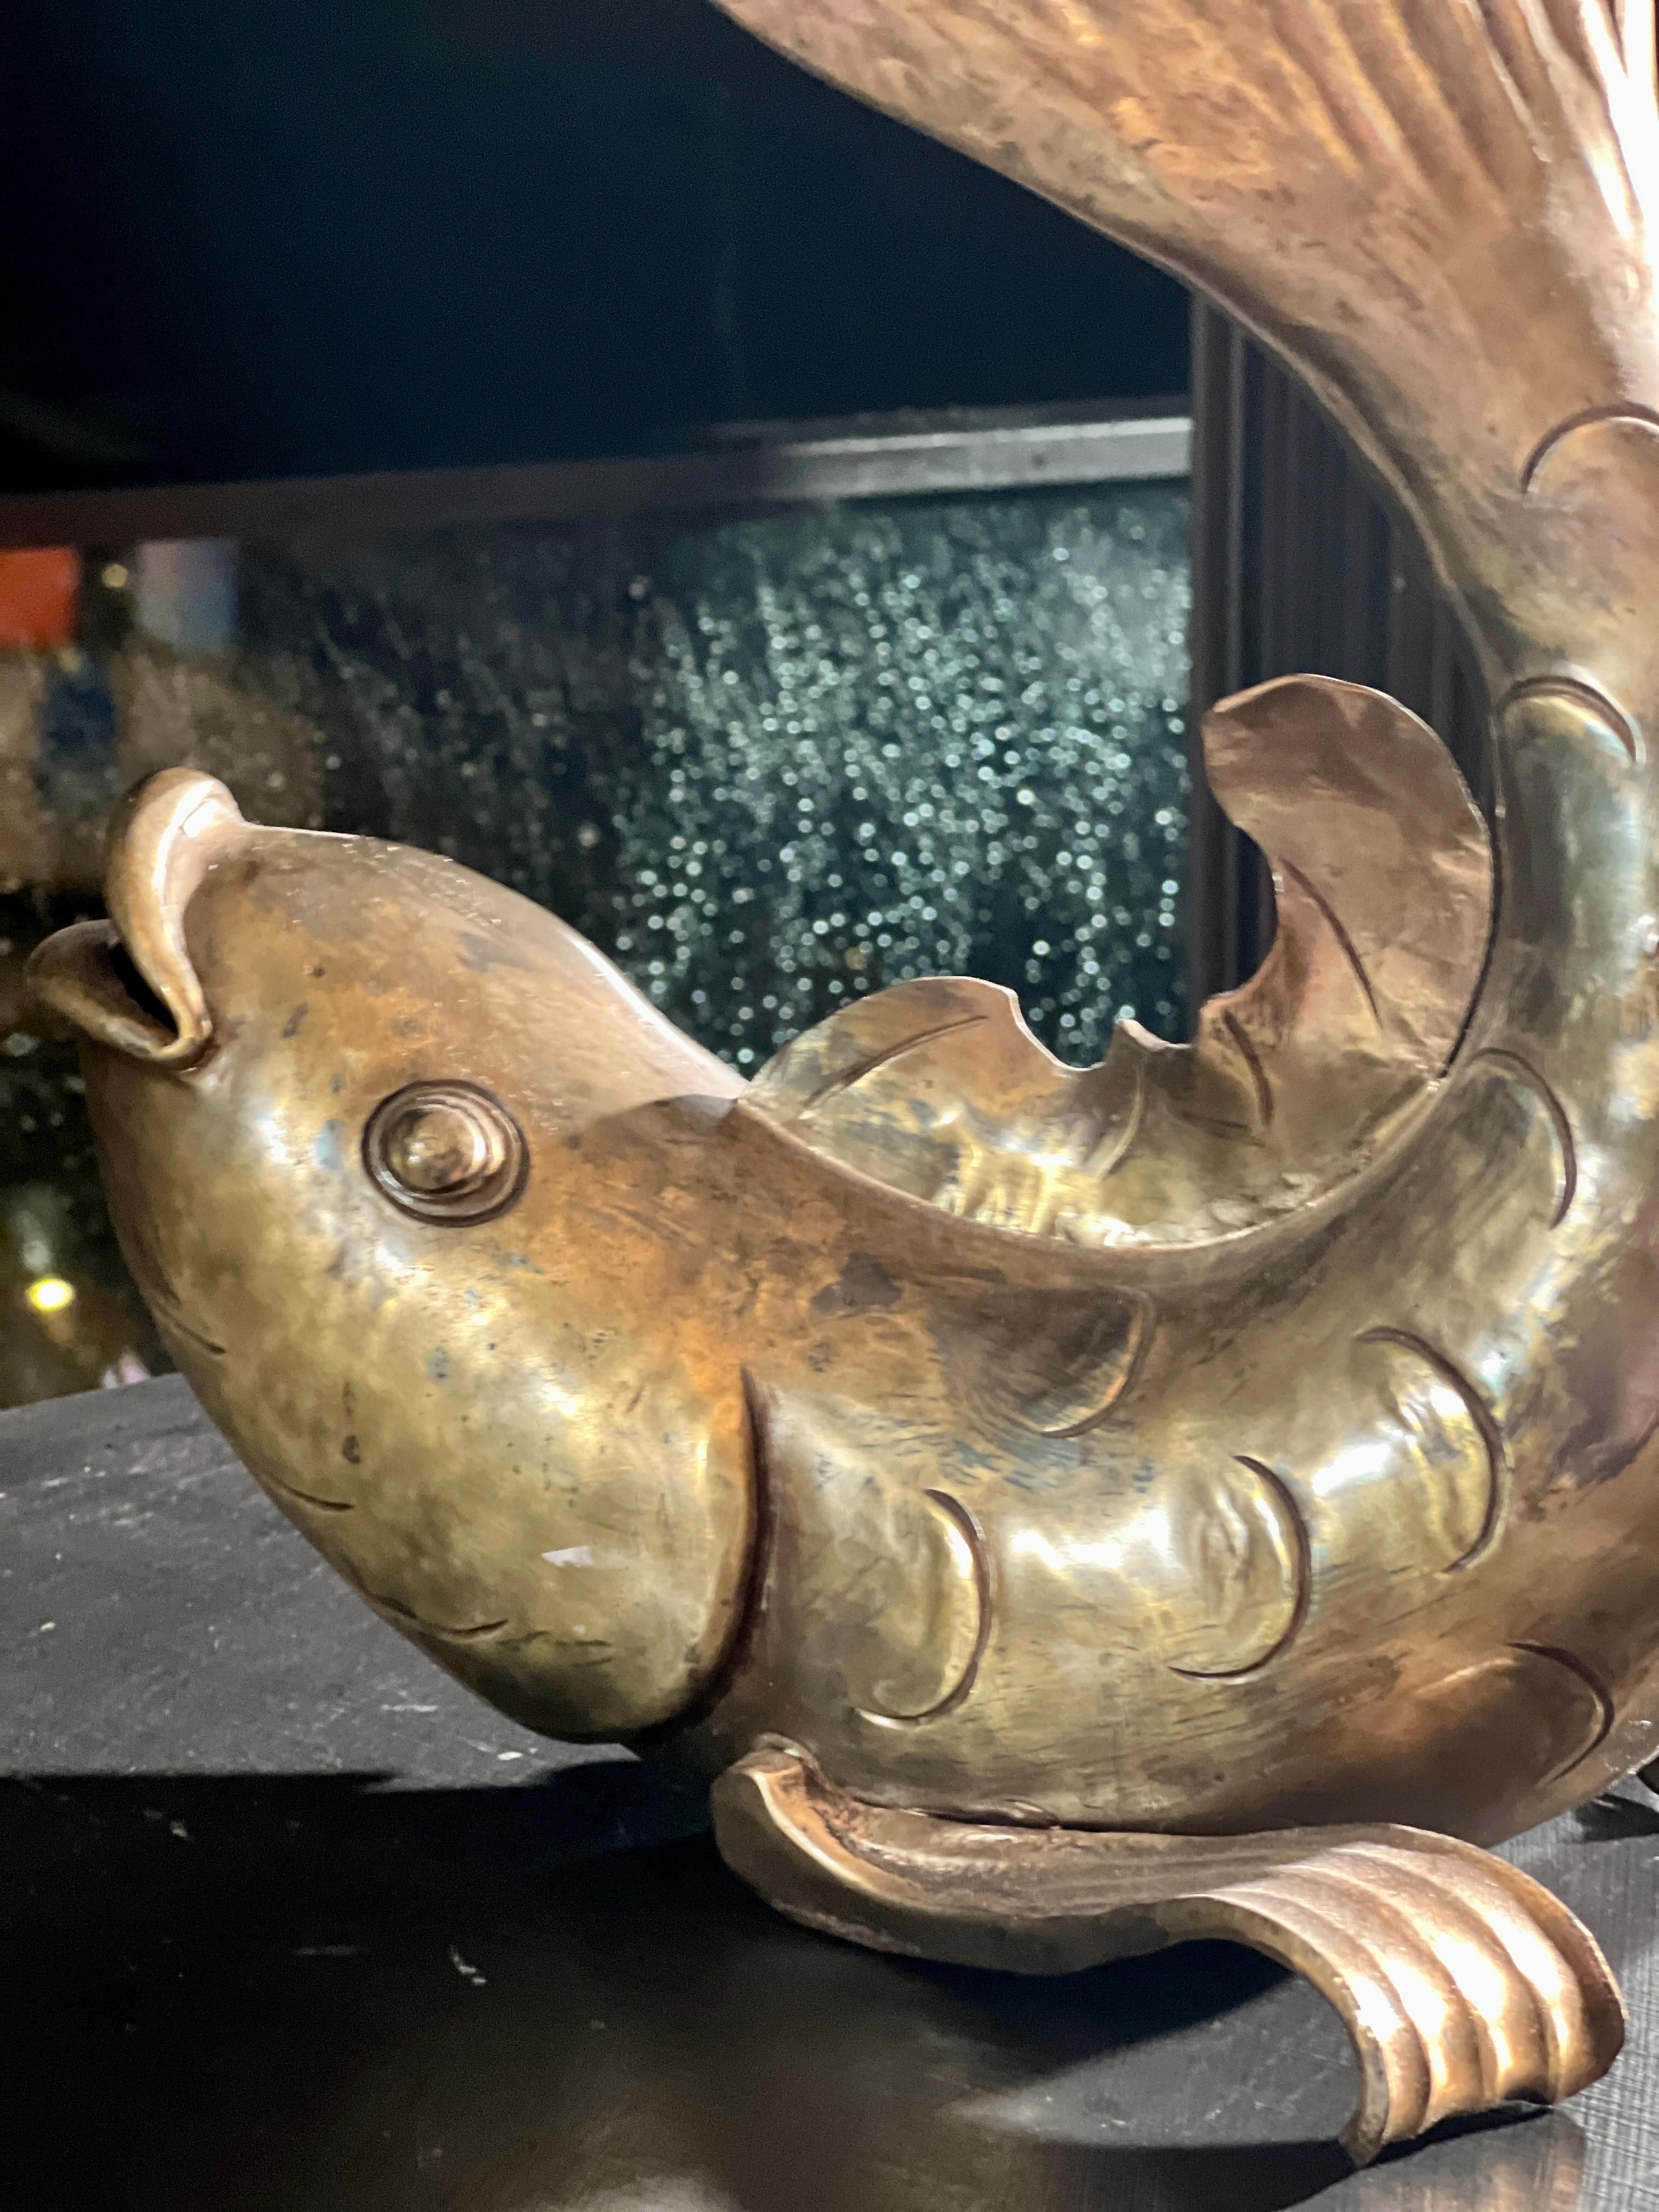 Gilded Aquatic Majesty: A Mesmerizing Bronze Fish Gracefully Adorns an Exquisite Table

In the opulent surroundings of a lavish European family home, adorned with exquisite artwork and rare treasures, there sat a magnificent antique brass Karpe fish